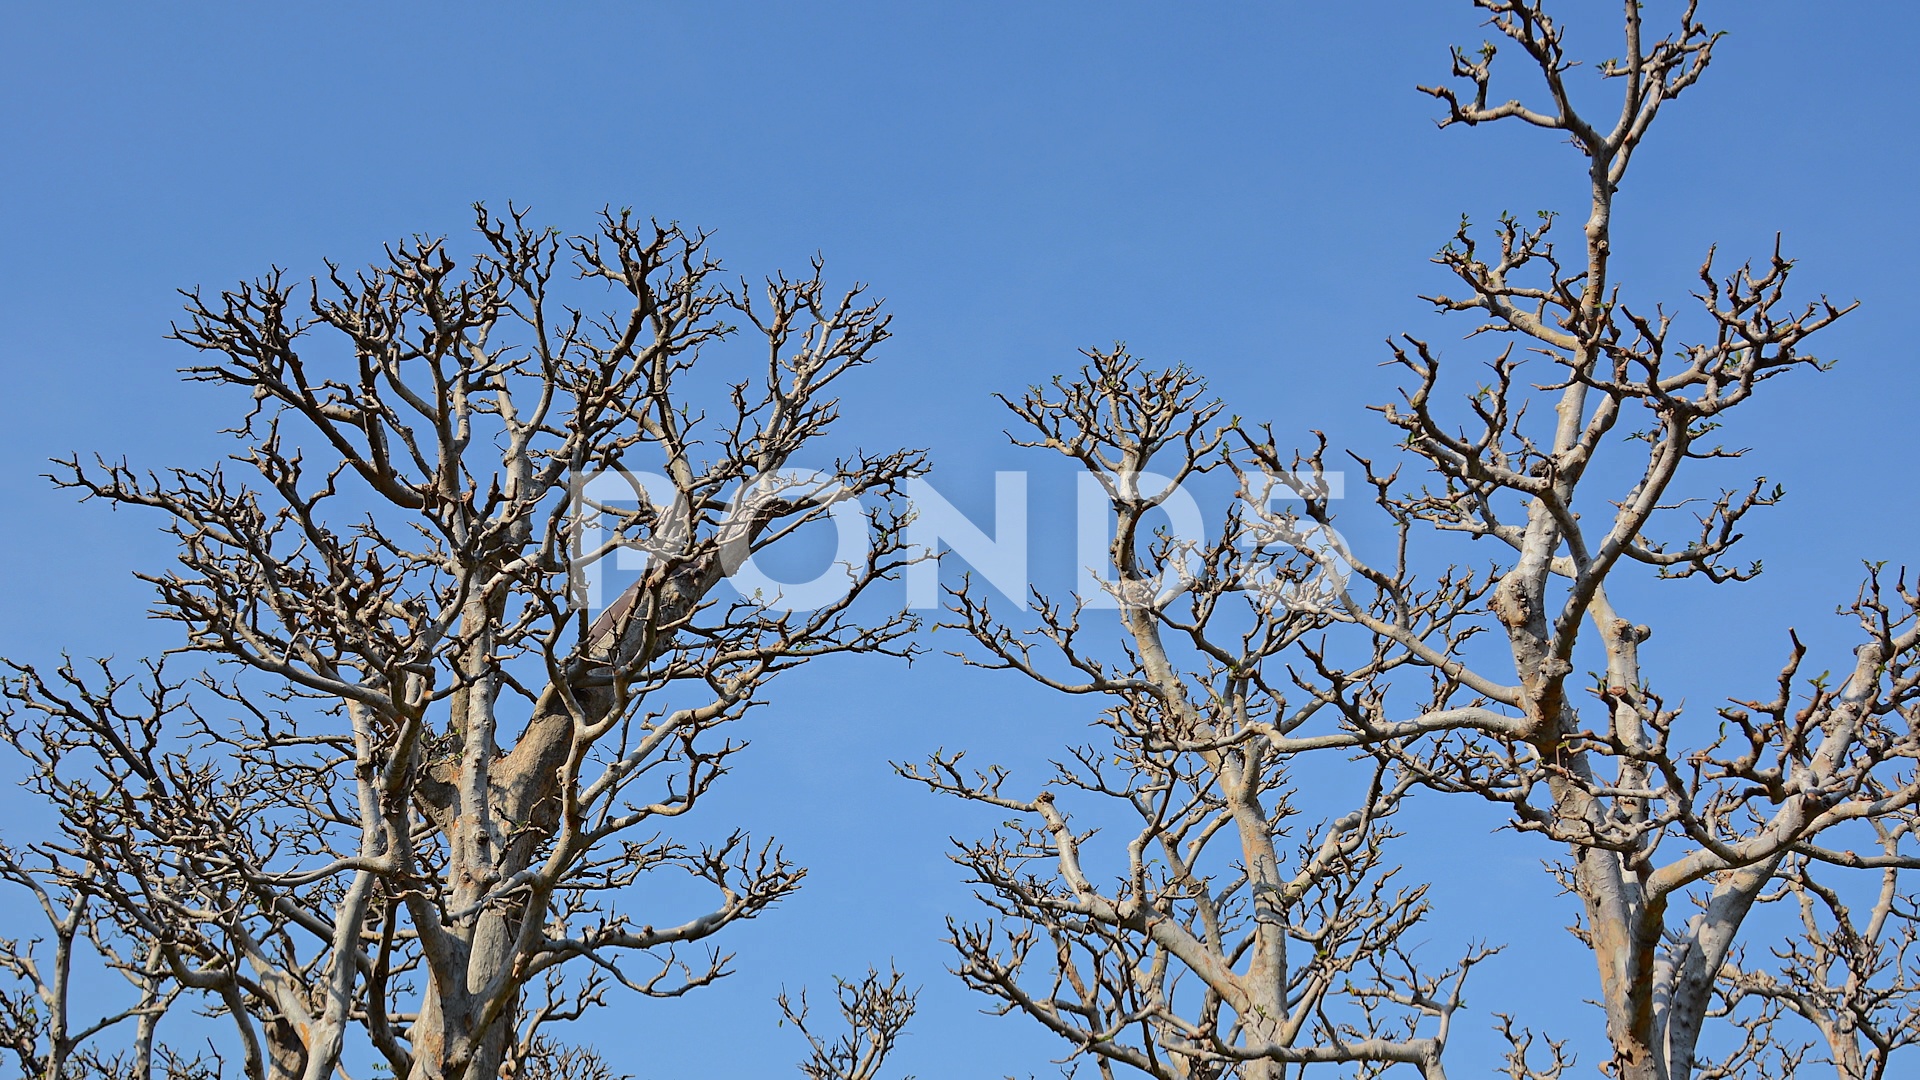 Lifeless Trunks and Branches of Trees against a Blue Sky ~ Clip ...